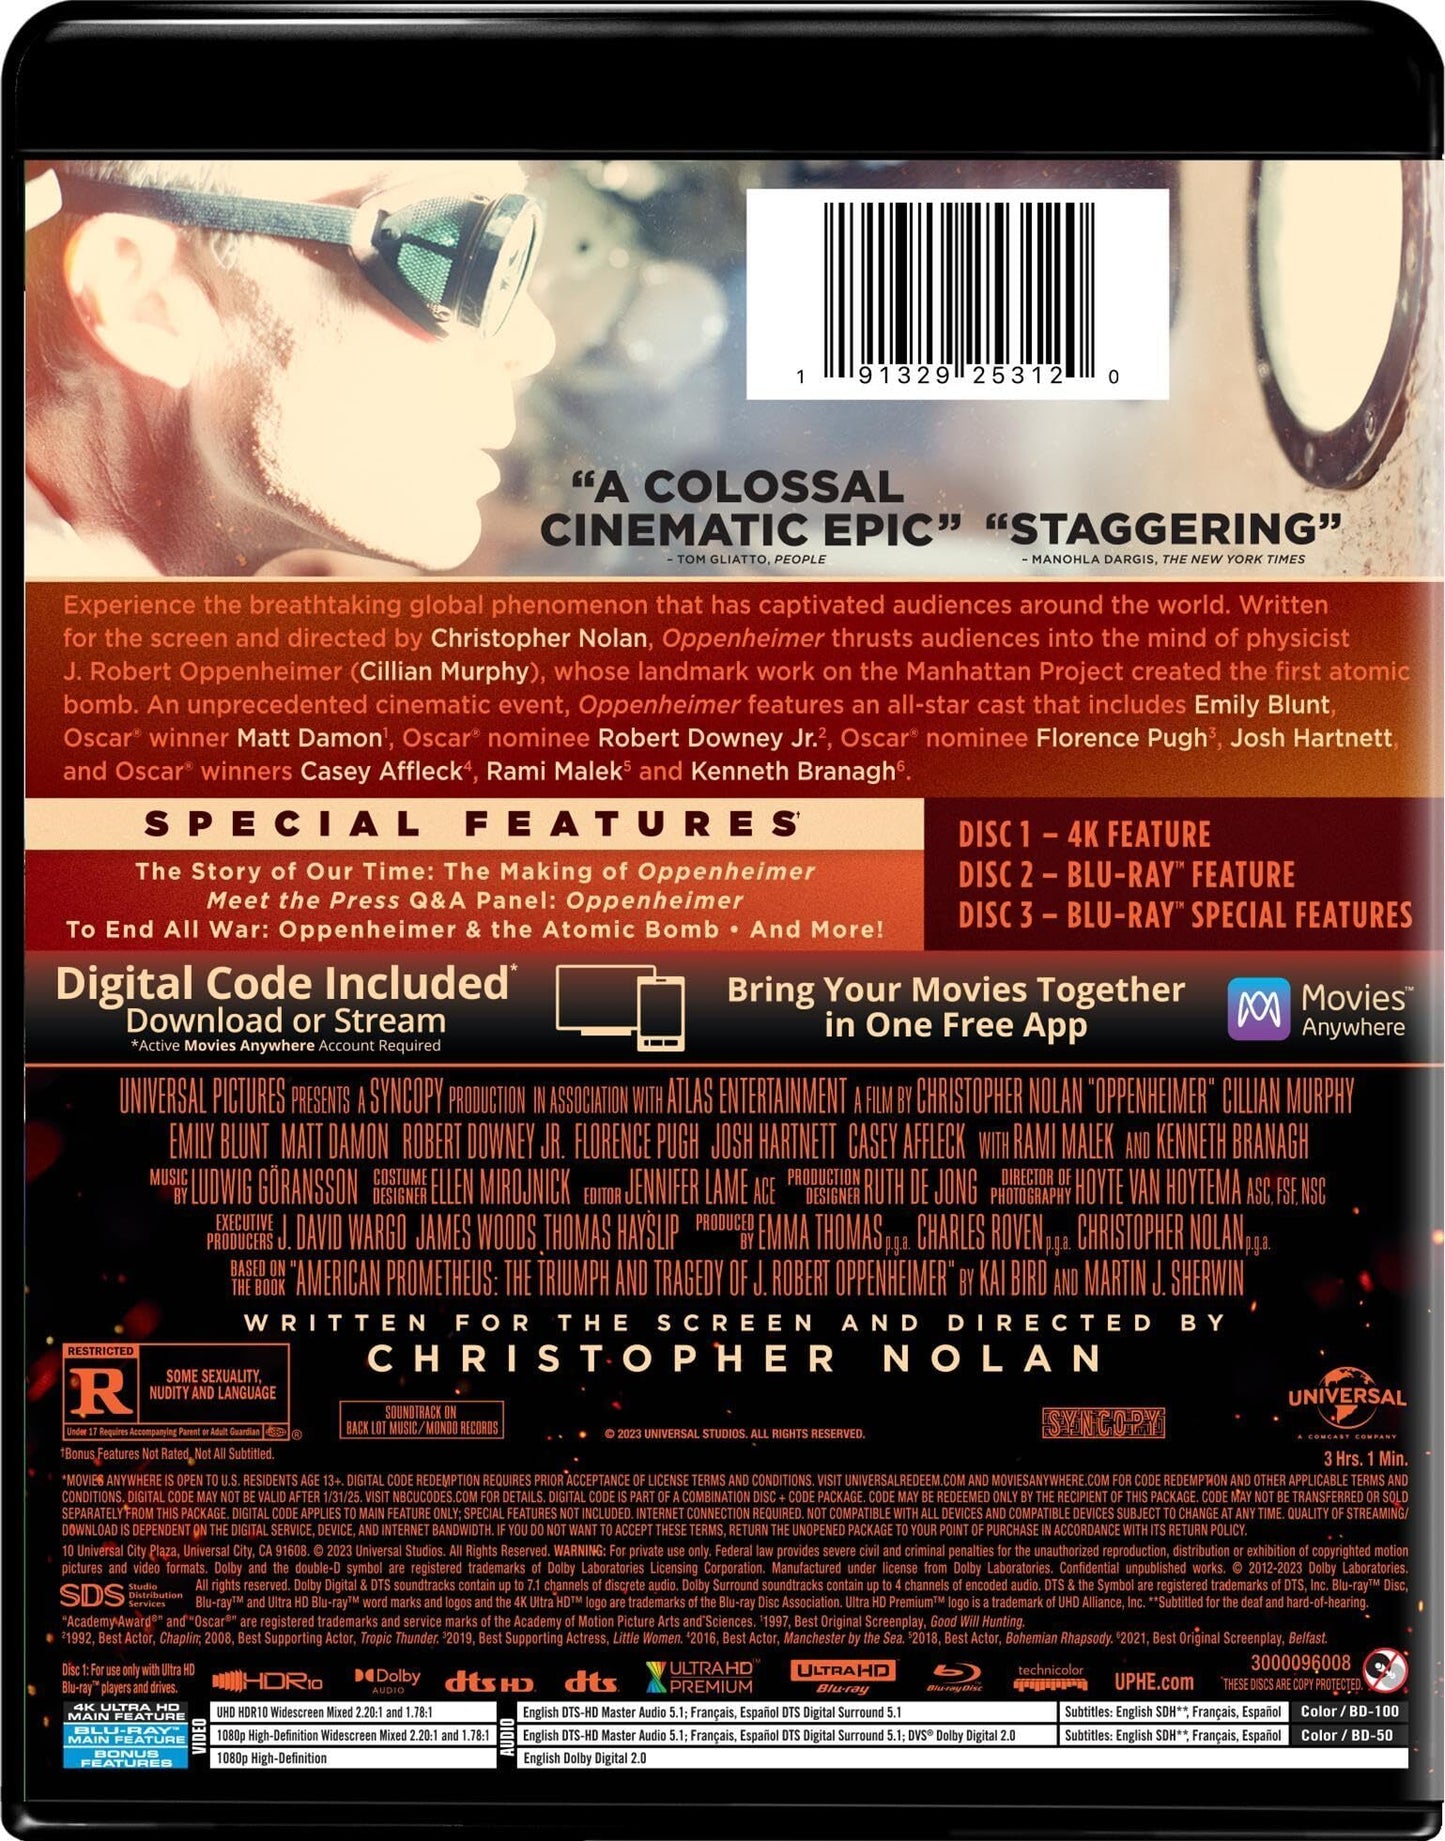 What Aspect Ratio Do You Think Oppenheimer Will Release In For 4k Blu-ray?  I Really Hope 1:43:1! : r/4kbluray